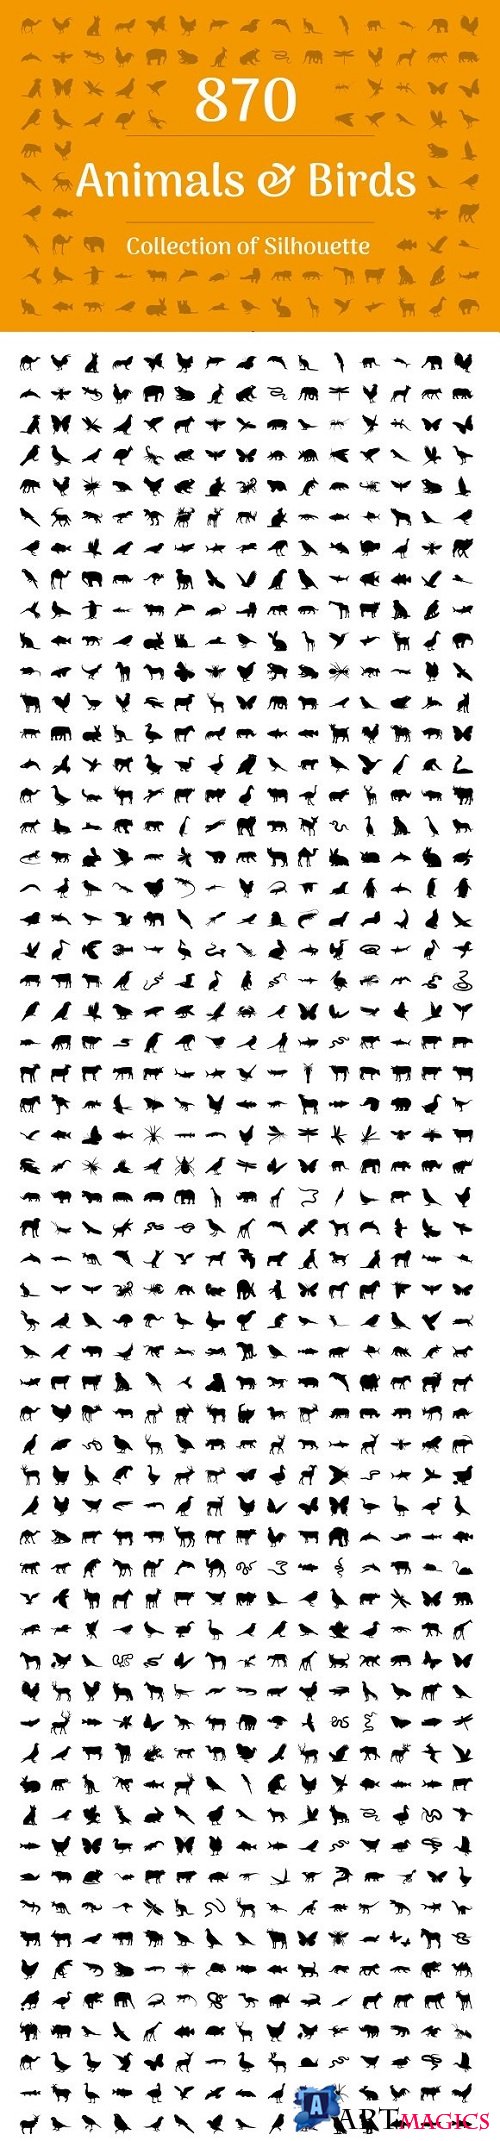 870 Animals and Birds Silhouette - 2194605